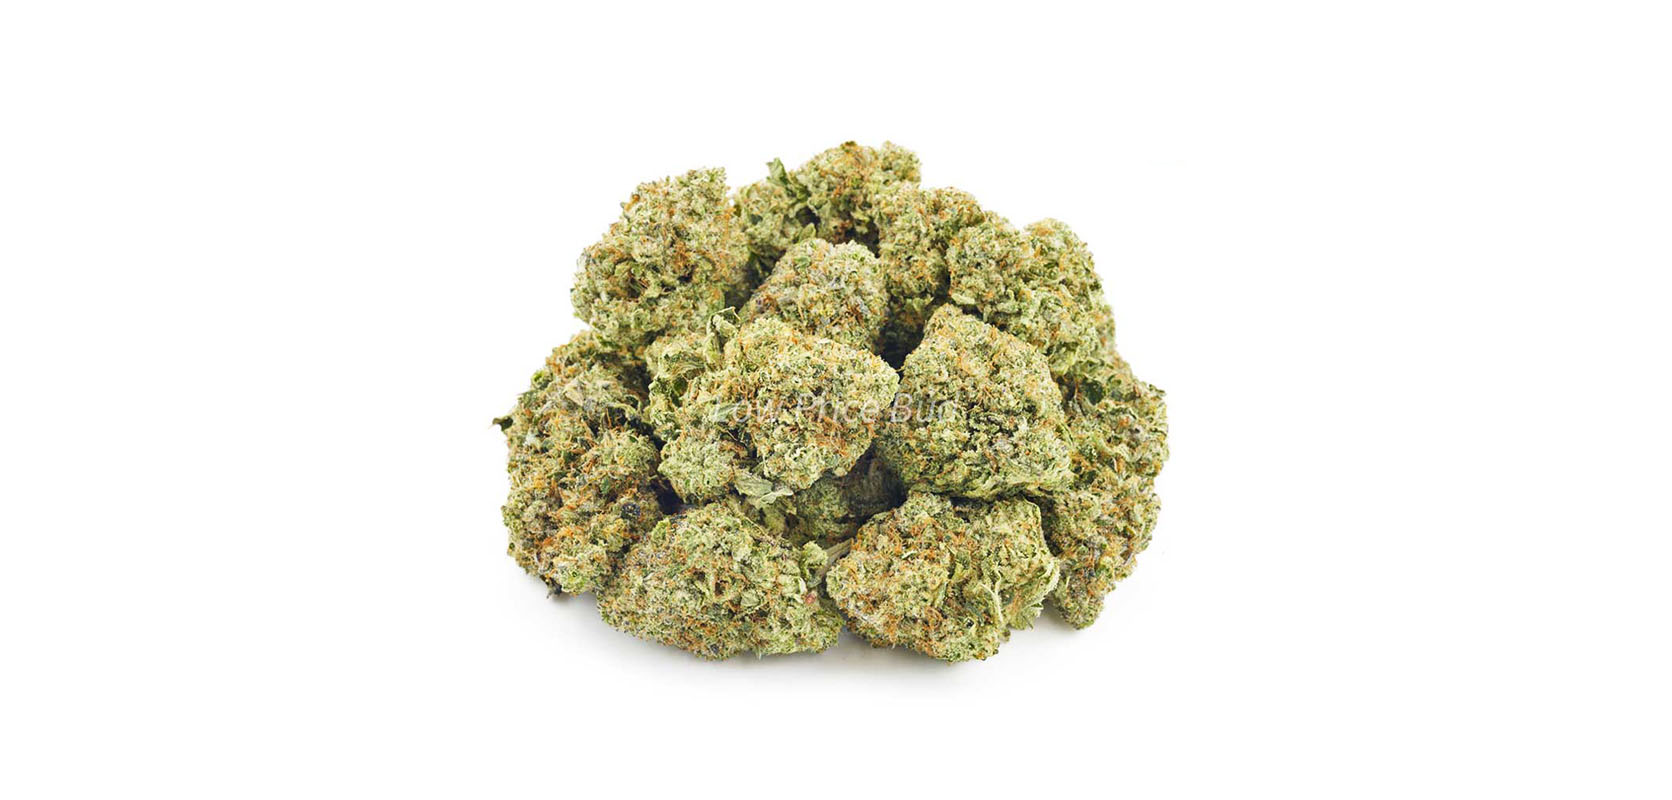 Hindu Skunk weed online from Low Price Bud budget ounces of cheap weed online in Canada.